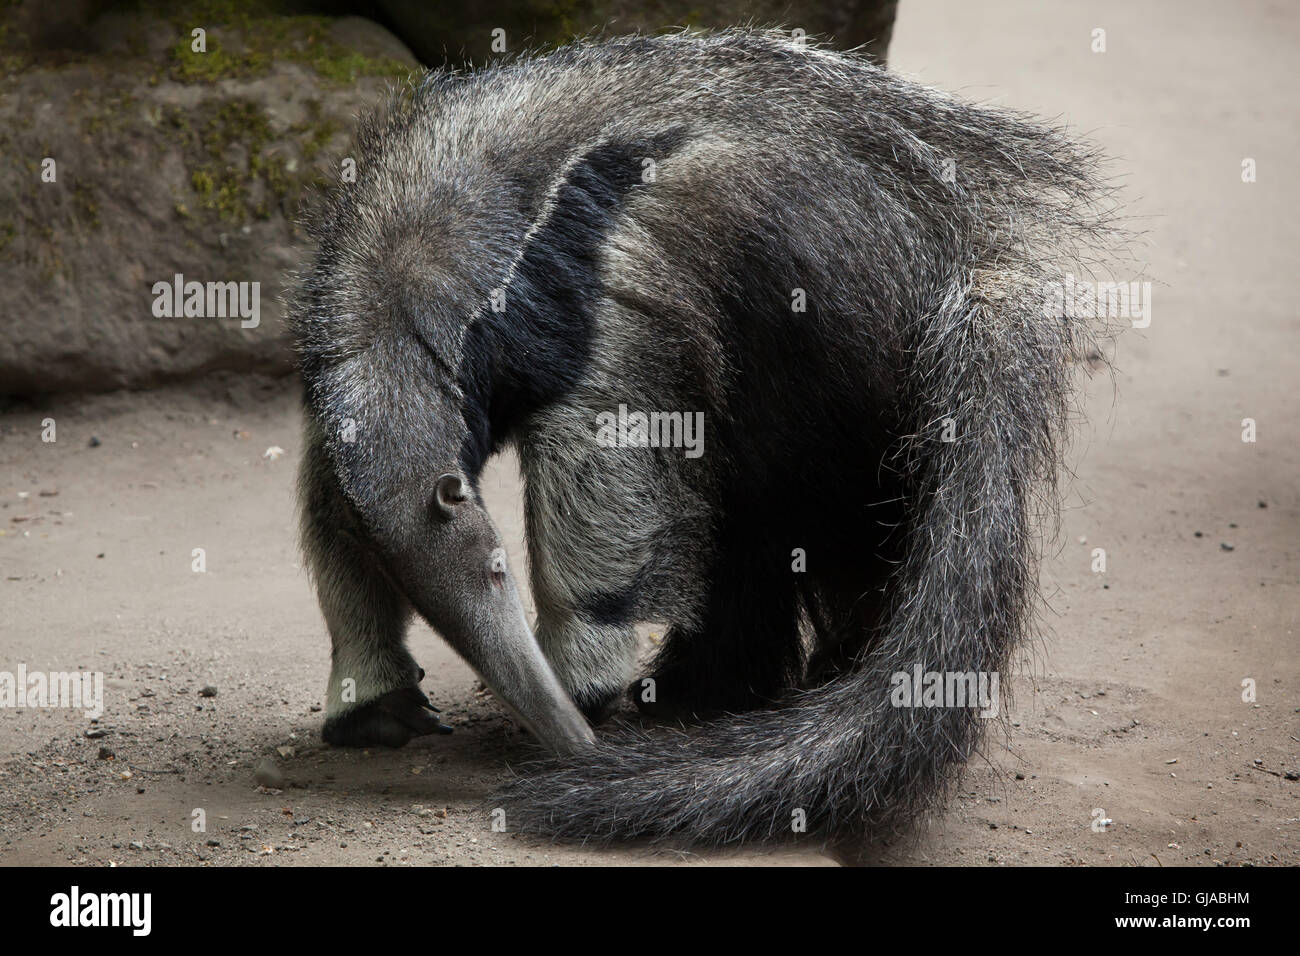 Giant anteater (Myrmecophaga tridactyla), also known as the ant bear. Stock Photo